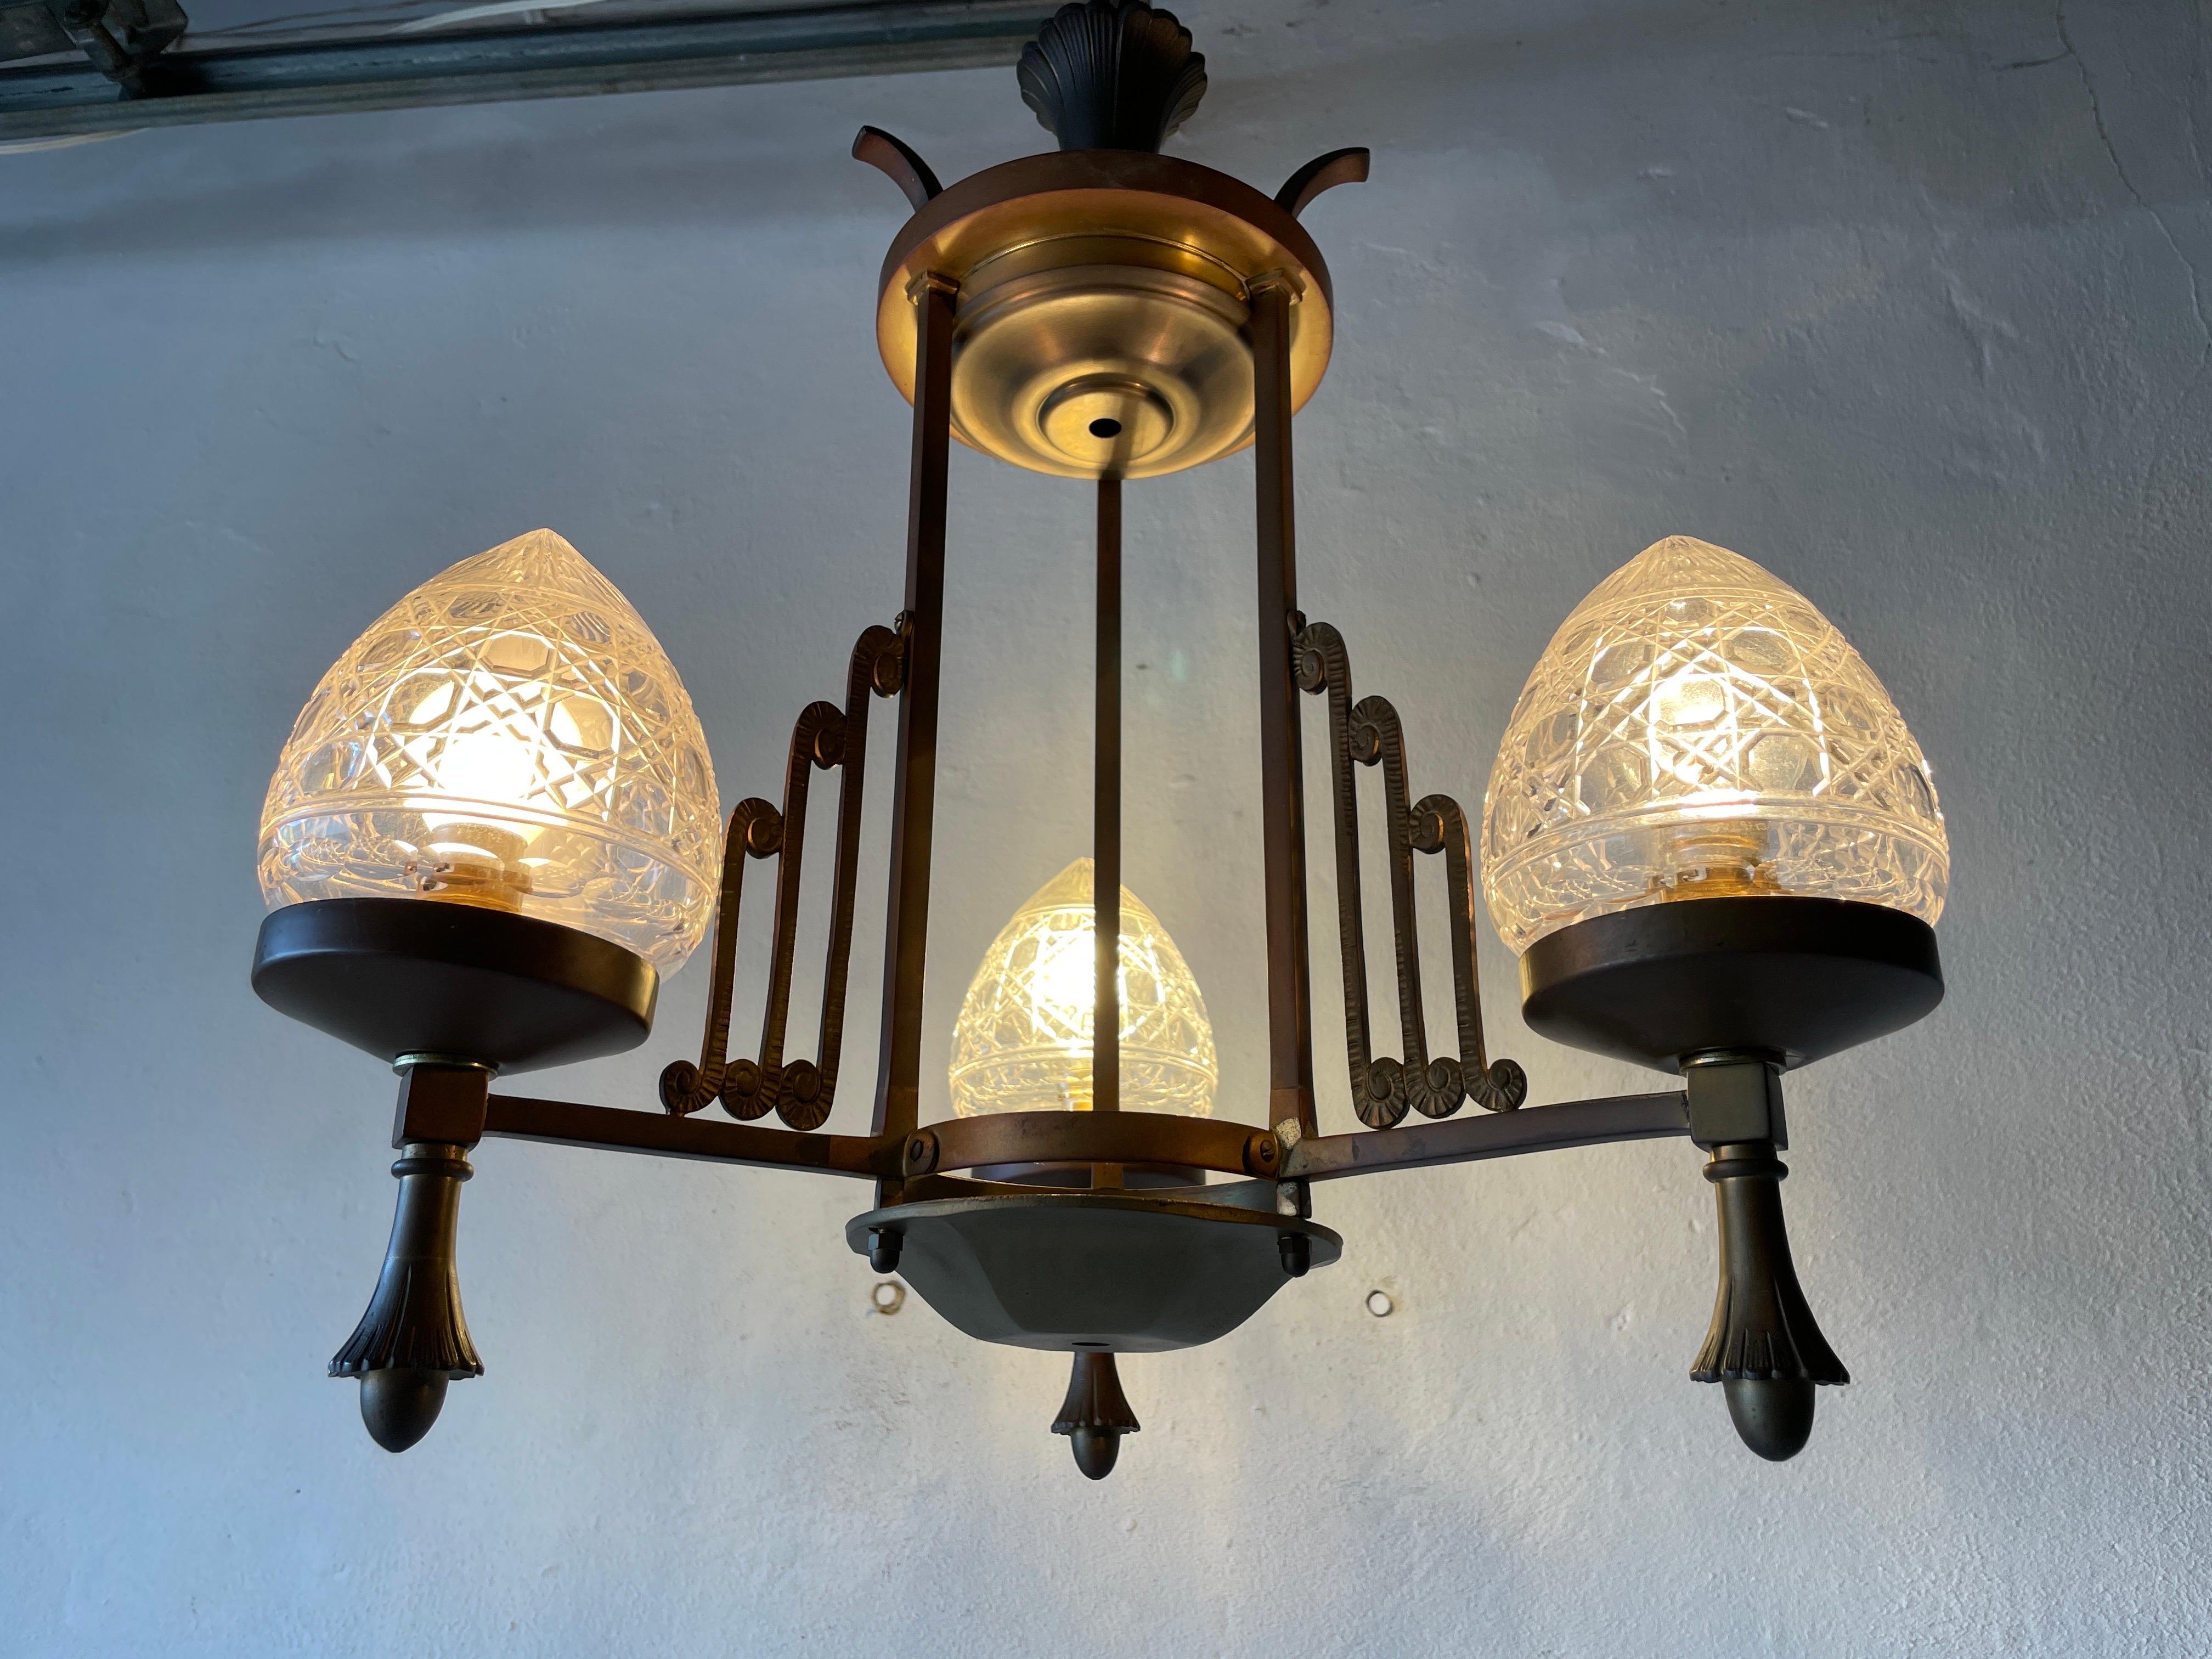 Unique French Copper Architectural Body Chandelier, 1940s, France For Sale 7